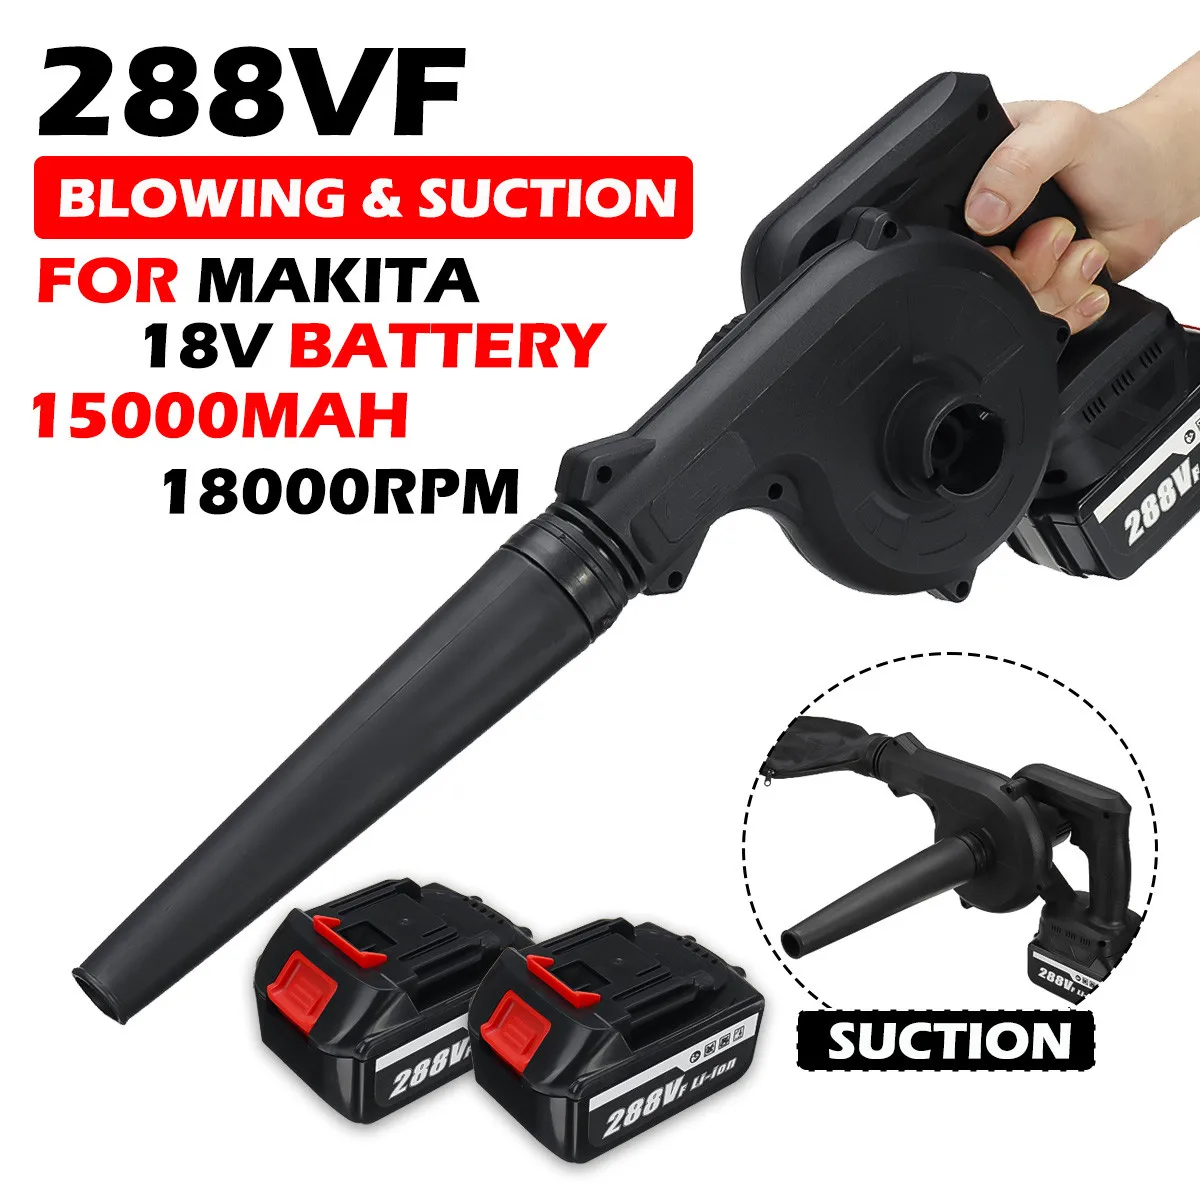 1500W 2 IN 1 Cordless Electric Air Blower & Suction Portable Handheld Dust Collector Cleaner For Makita 18V Battery EU US